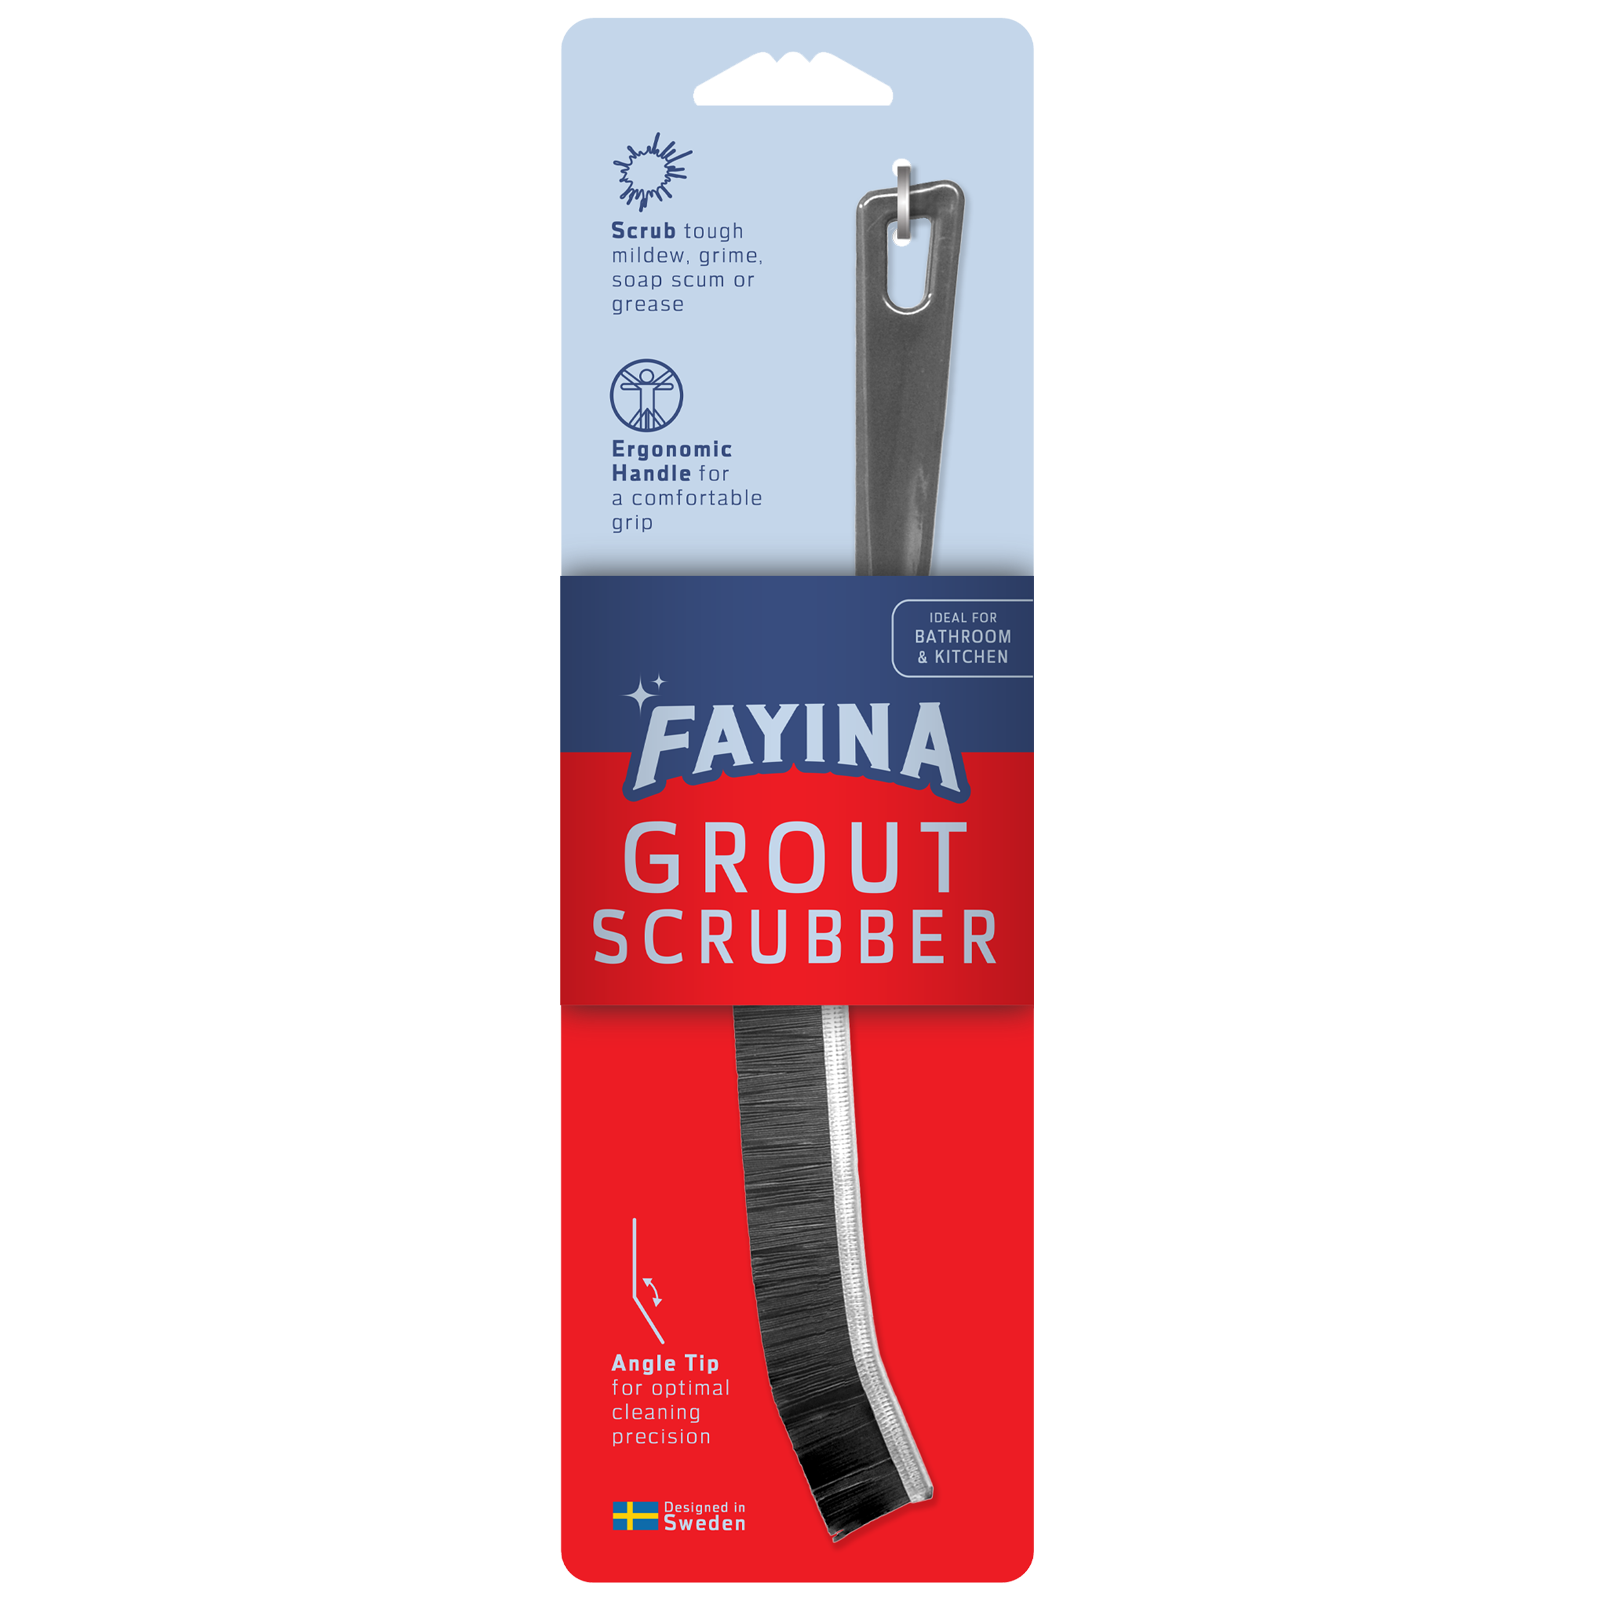 Fayina Grout Scrubber - 1ct/12pk